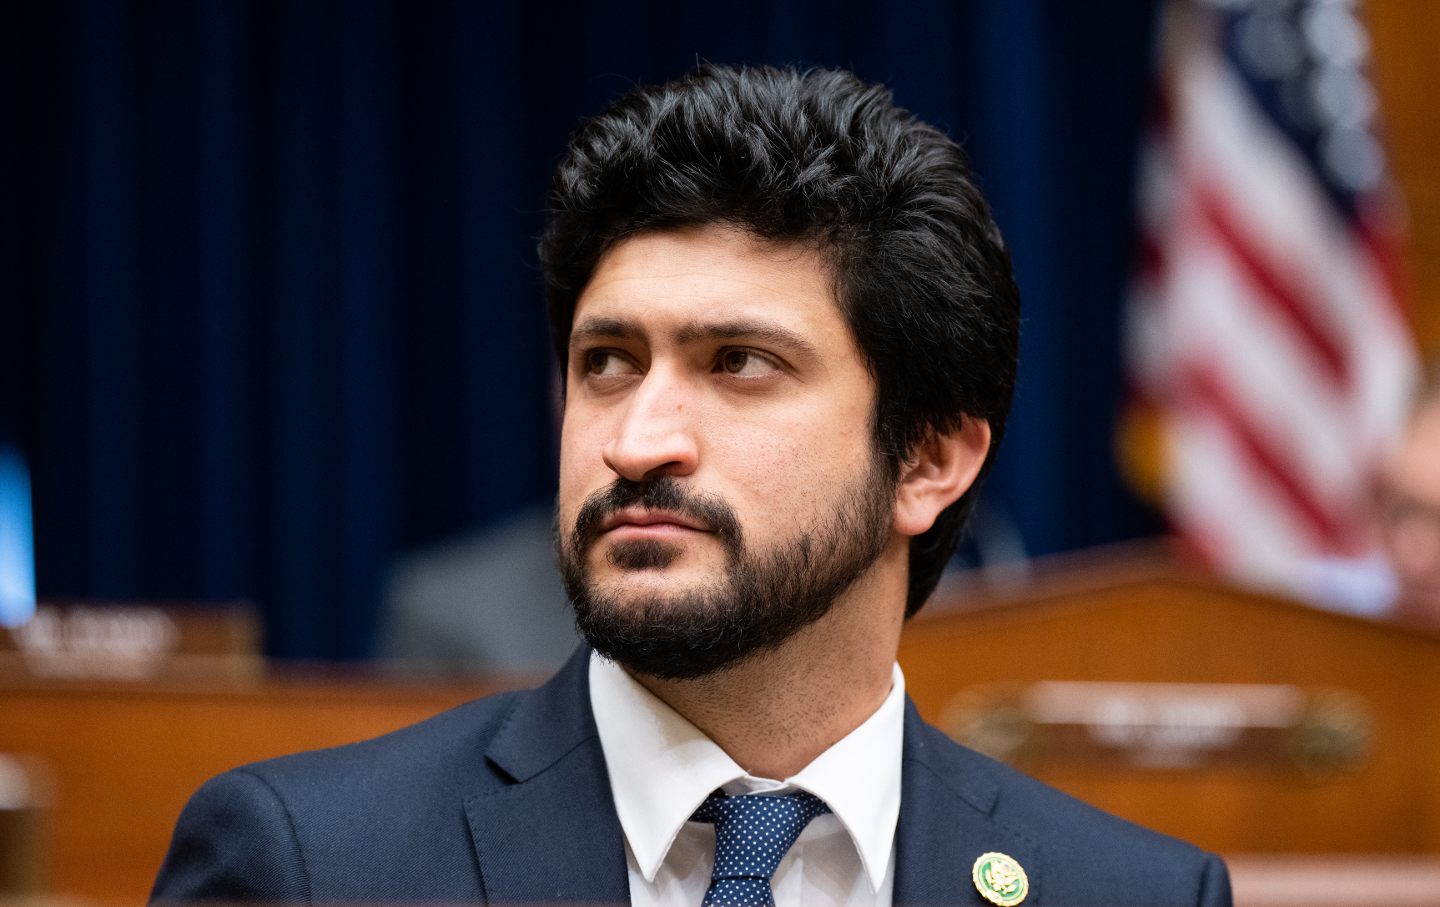 Representative Greg Casar, D-Texas, participates in the House Oversight and Accountability Committee organizing meeting in the Rayburn House Office Building on Tuesday, January 31, 2023.